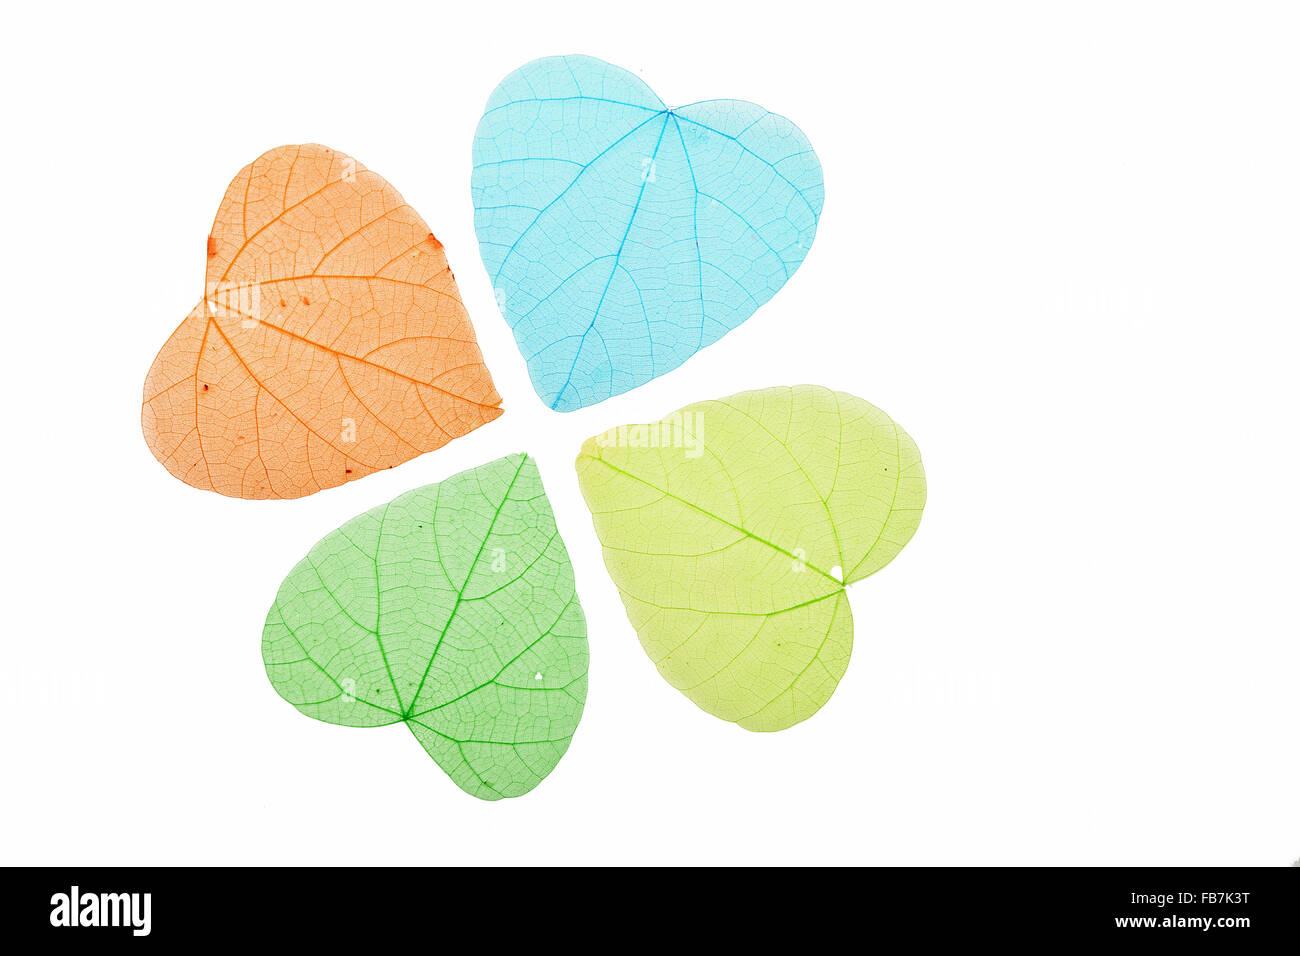 Group of four heart shaped dried skeleton leaves, green, blue and yellow, decoration isolated on white background Stock Photo